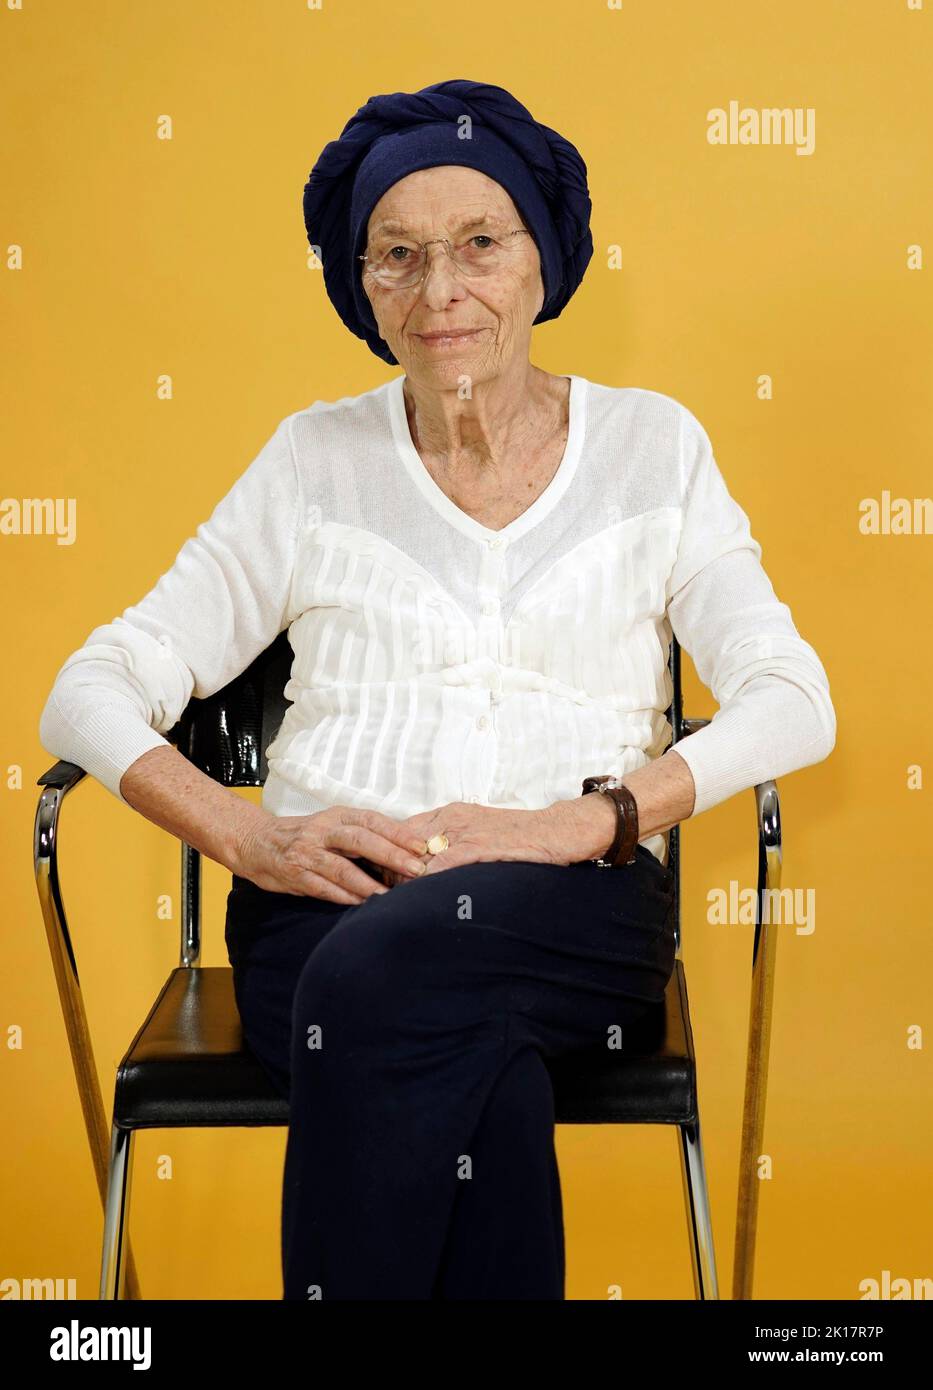 Italy, Rome, September 8, 2022 : Emma Bonino leader of +Europe (+Europa), former Foreign Minister. In Italy on September 25 there will be political el Stock Photo